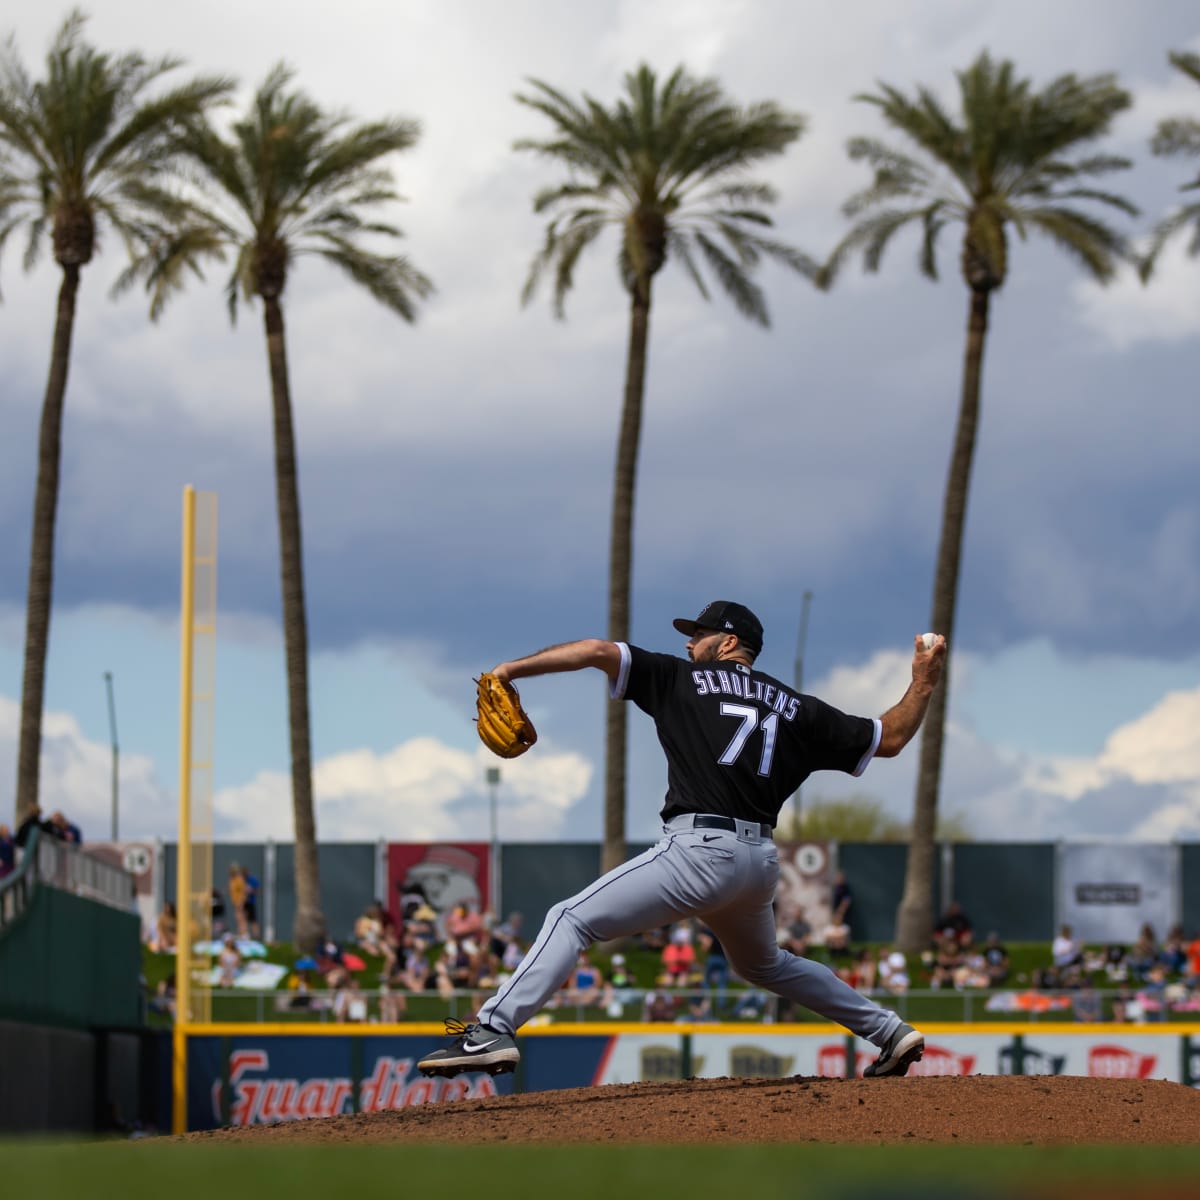 Chicago White Sox P Jesse Scholtens back in the starting role